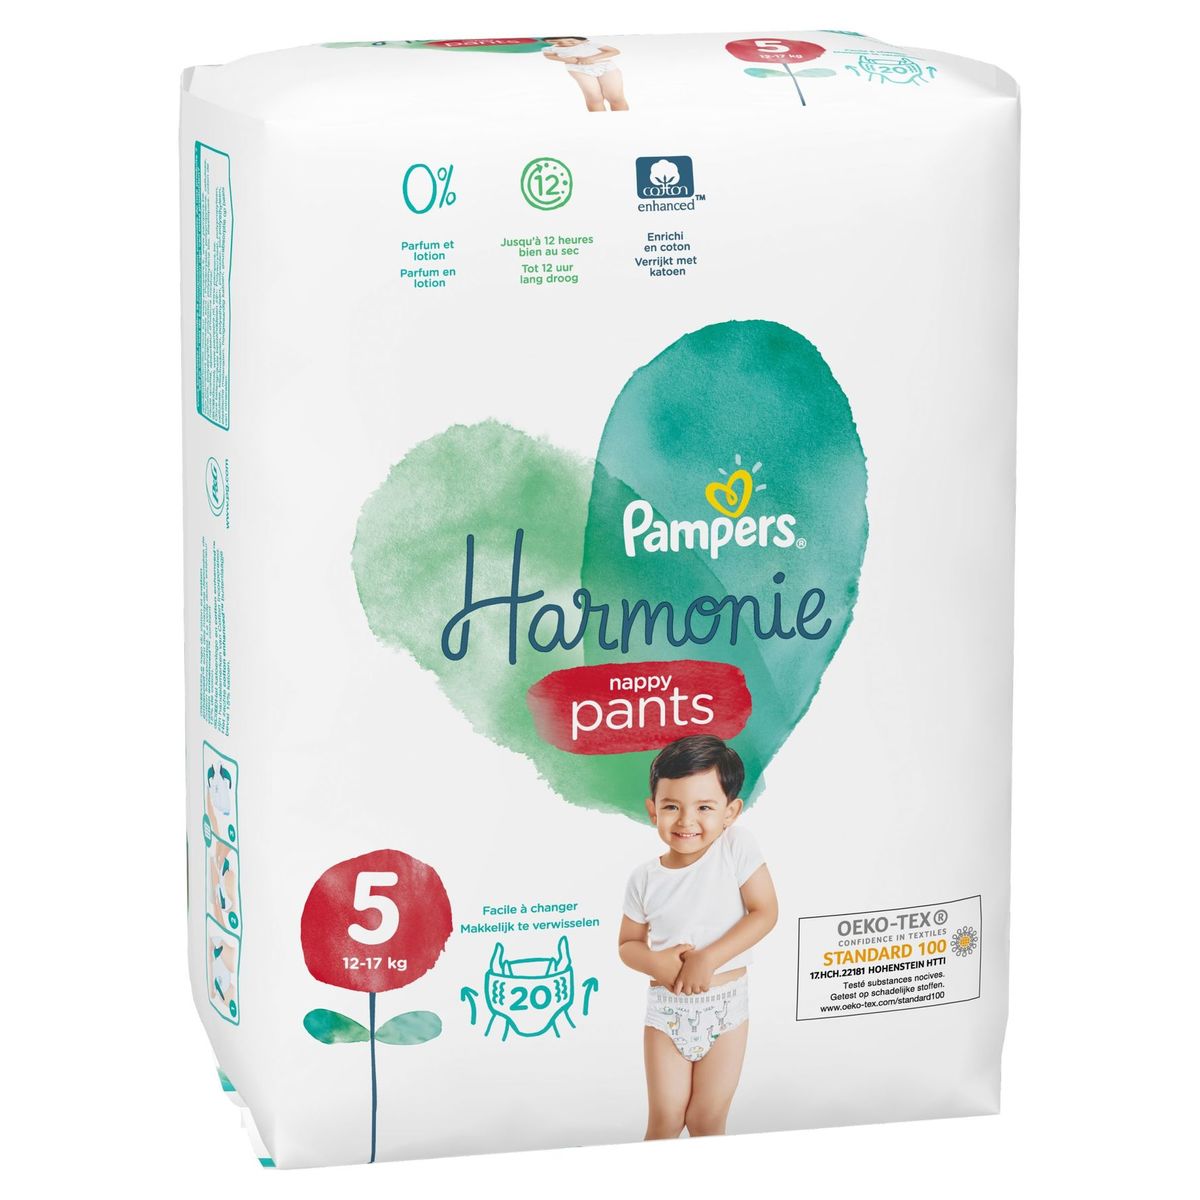 Pampers Harmonie Pants Couches-Culottes T5, 20 Culottes, 12kg-17kg